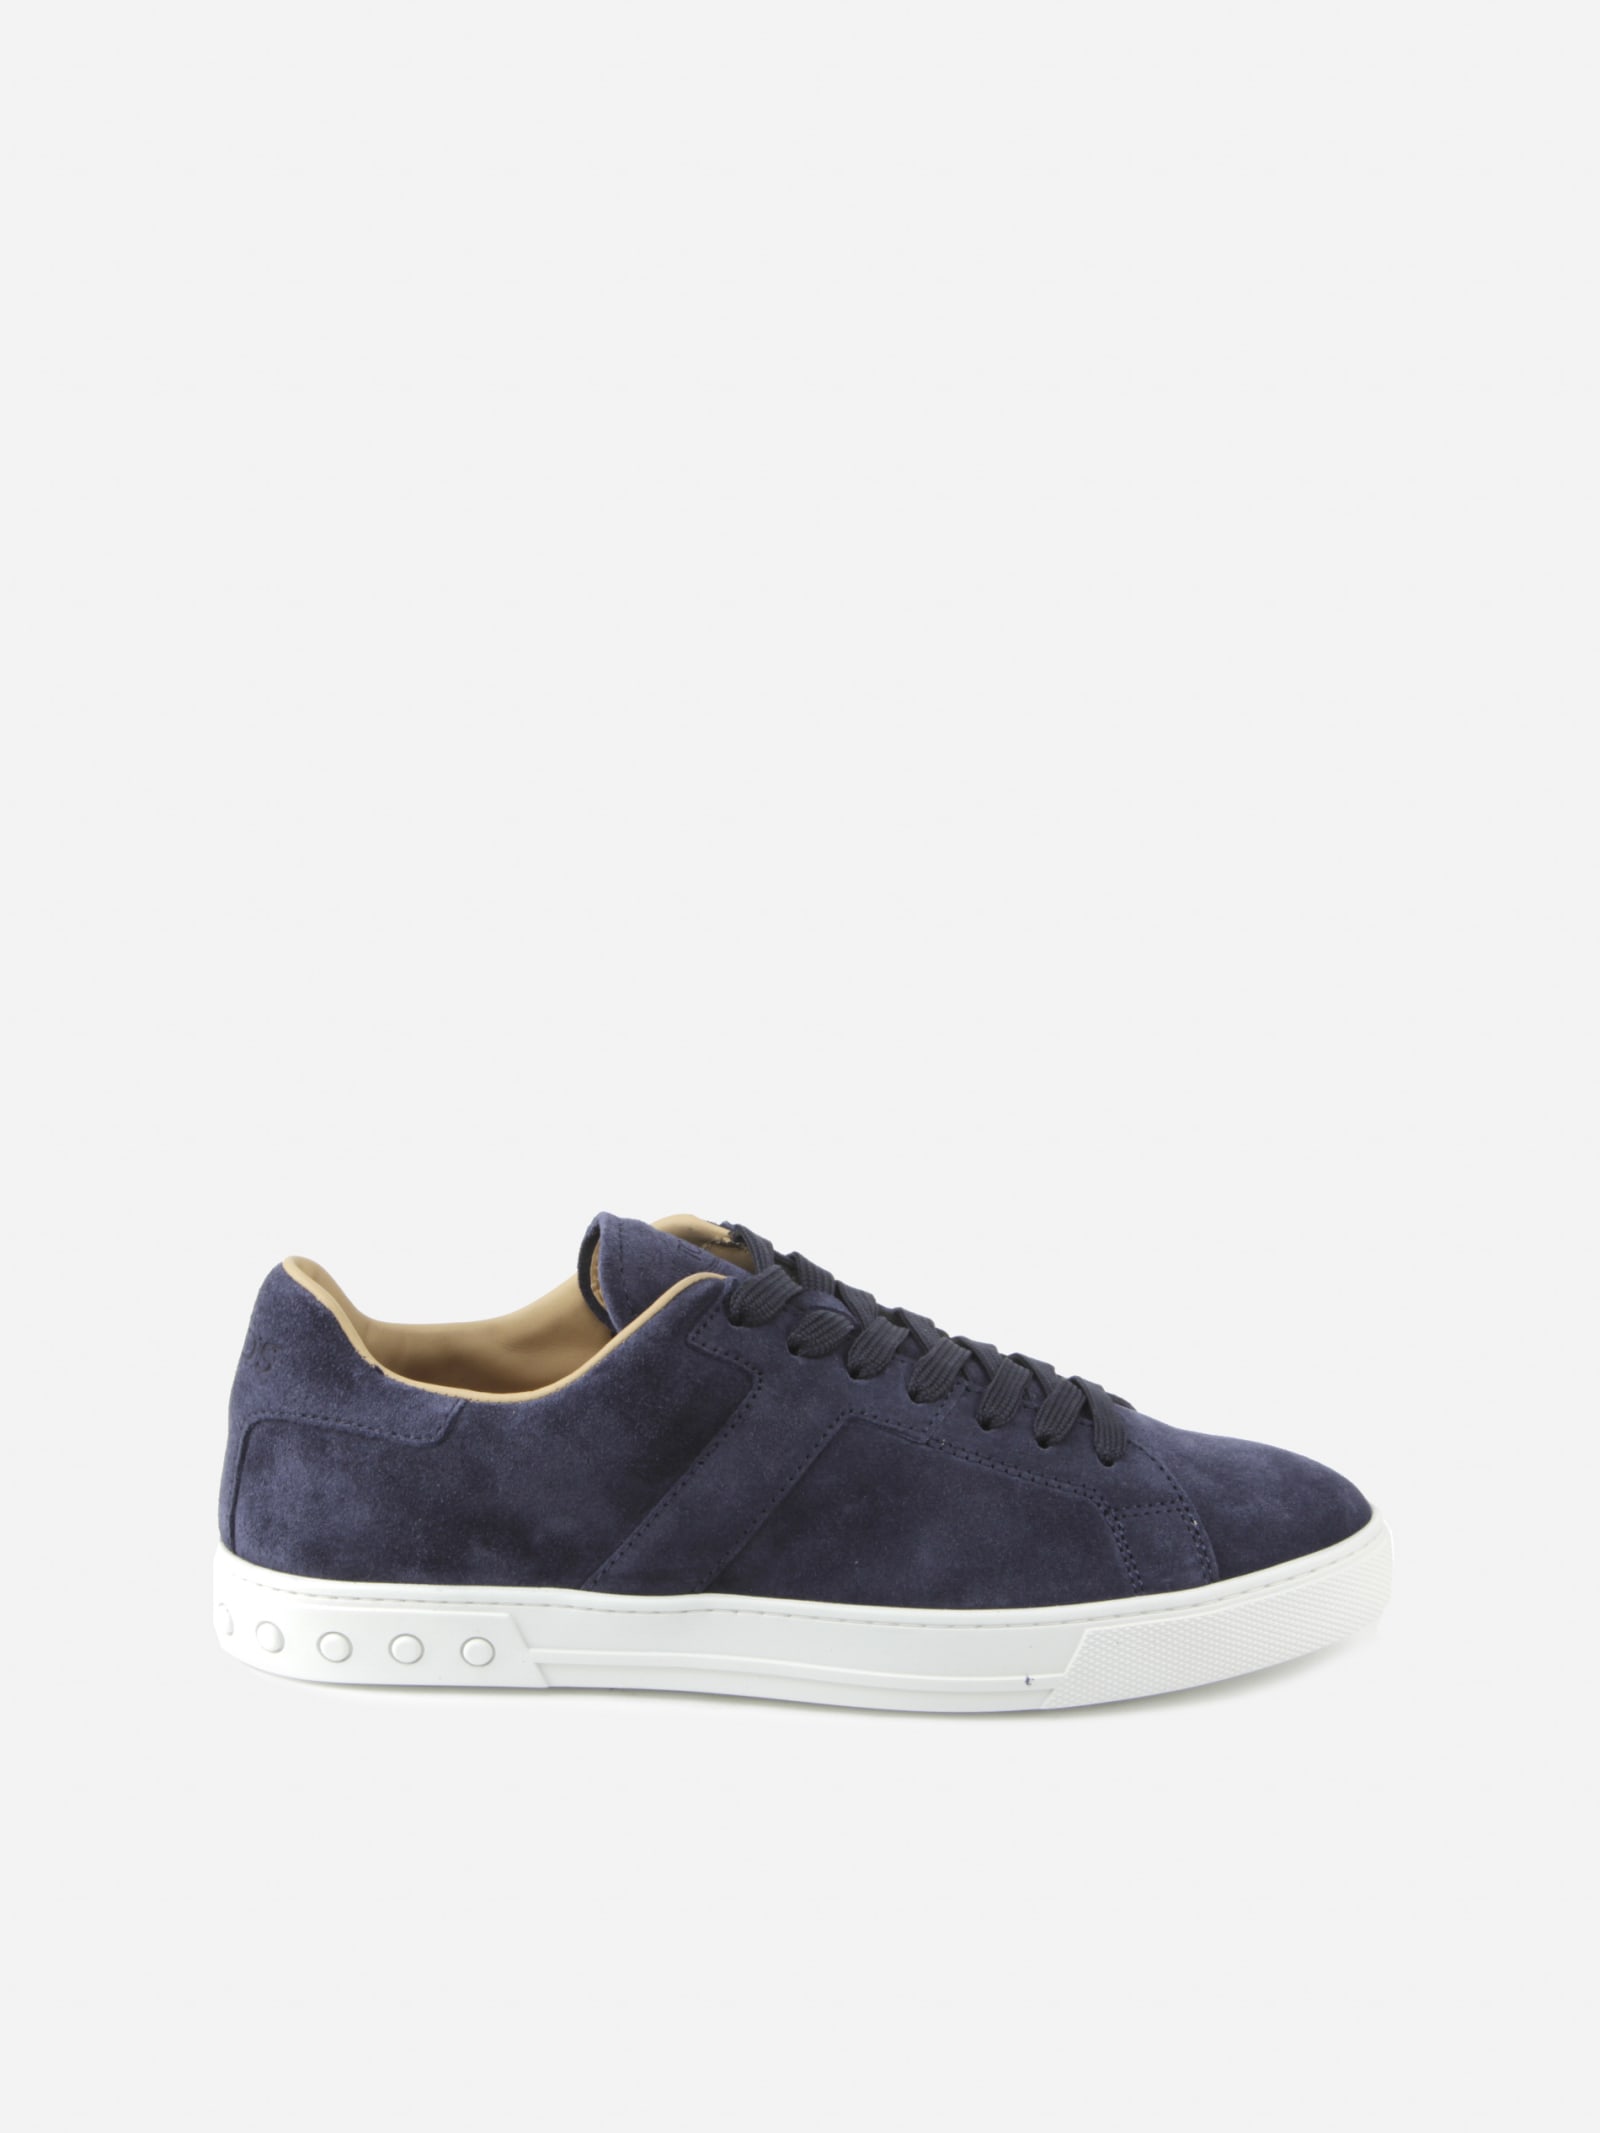 Tods Suede Sneakers With Monogram Detail